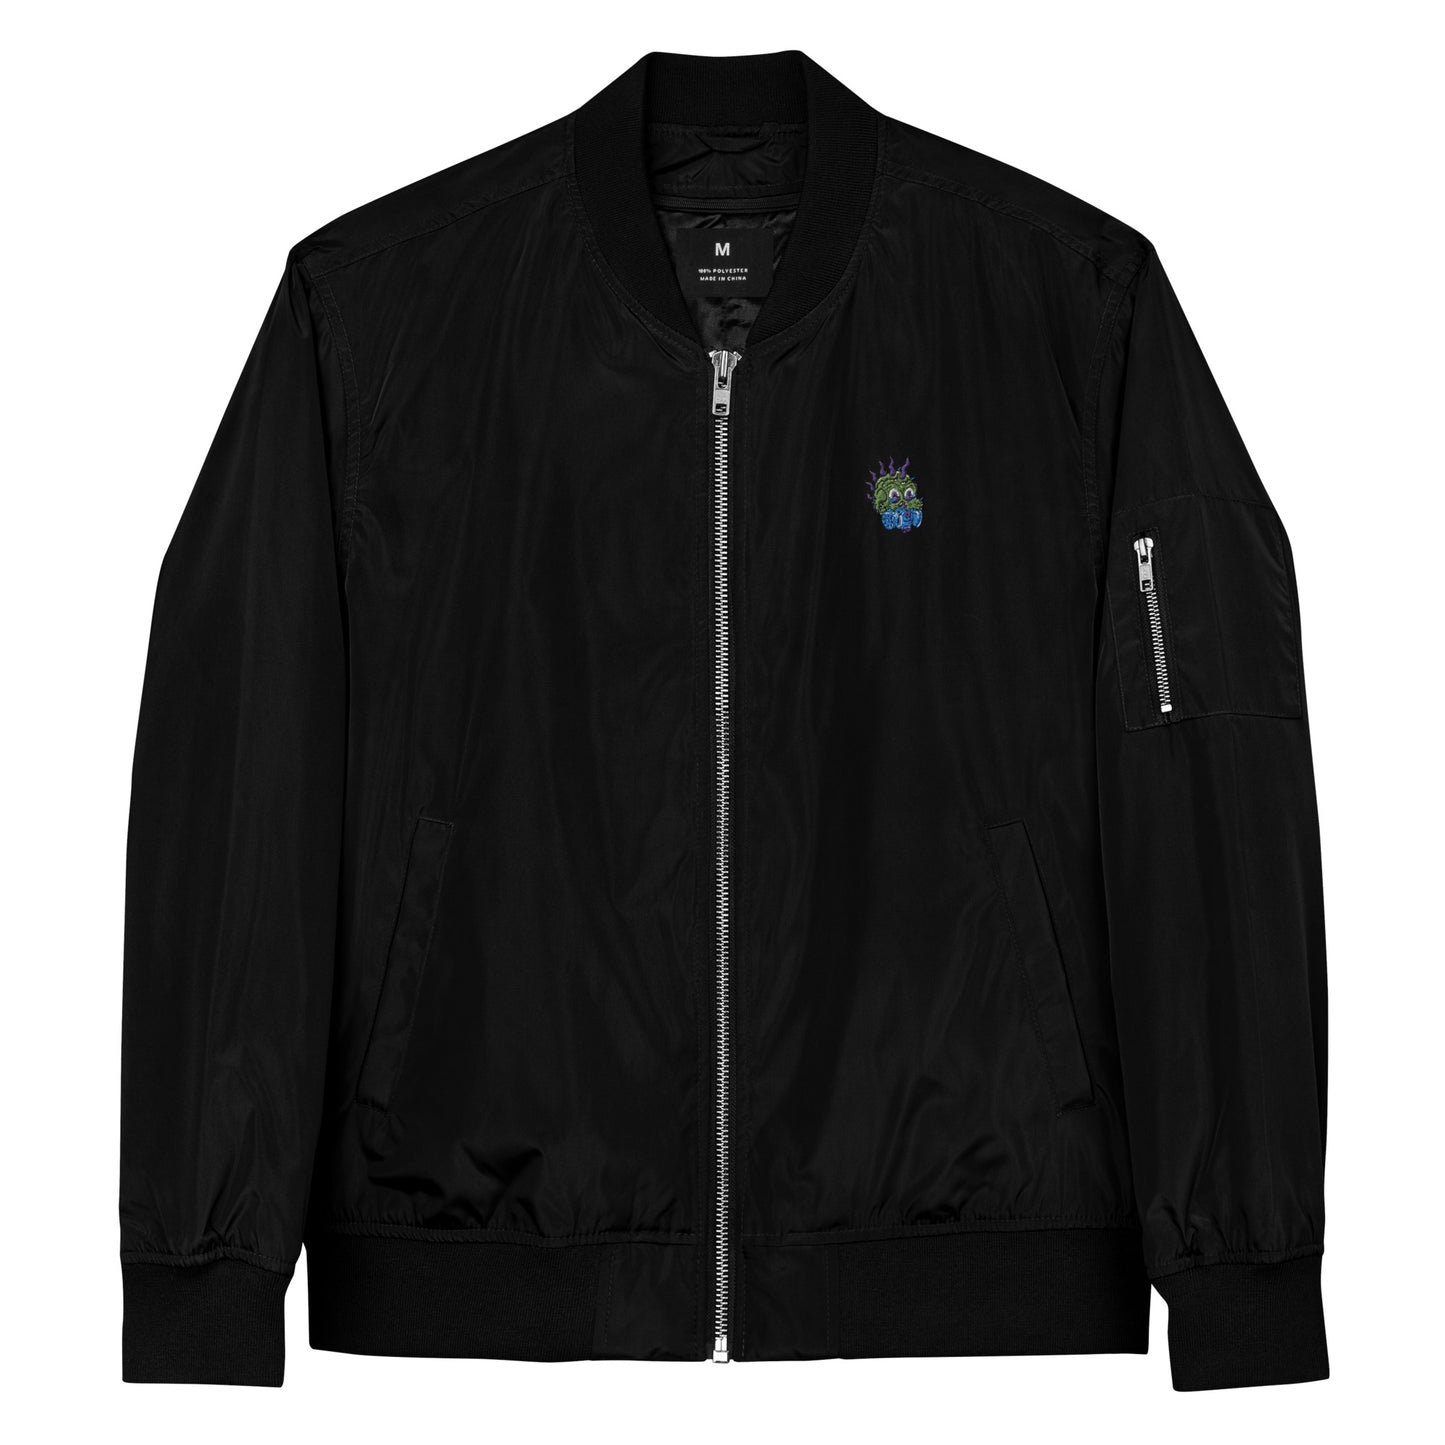 Premium recycled bomber jacket feat Toxic Skulls Club #7803 (embroidered)